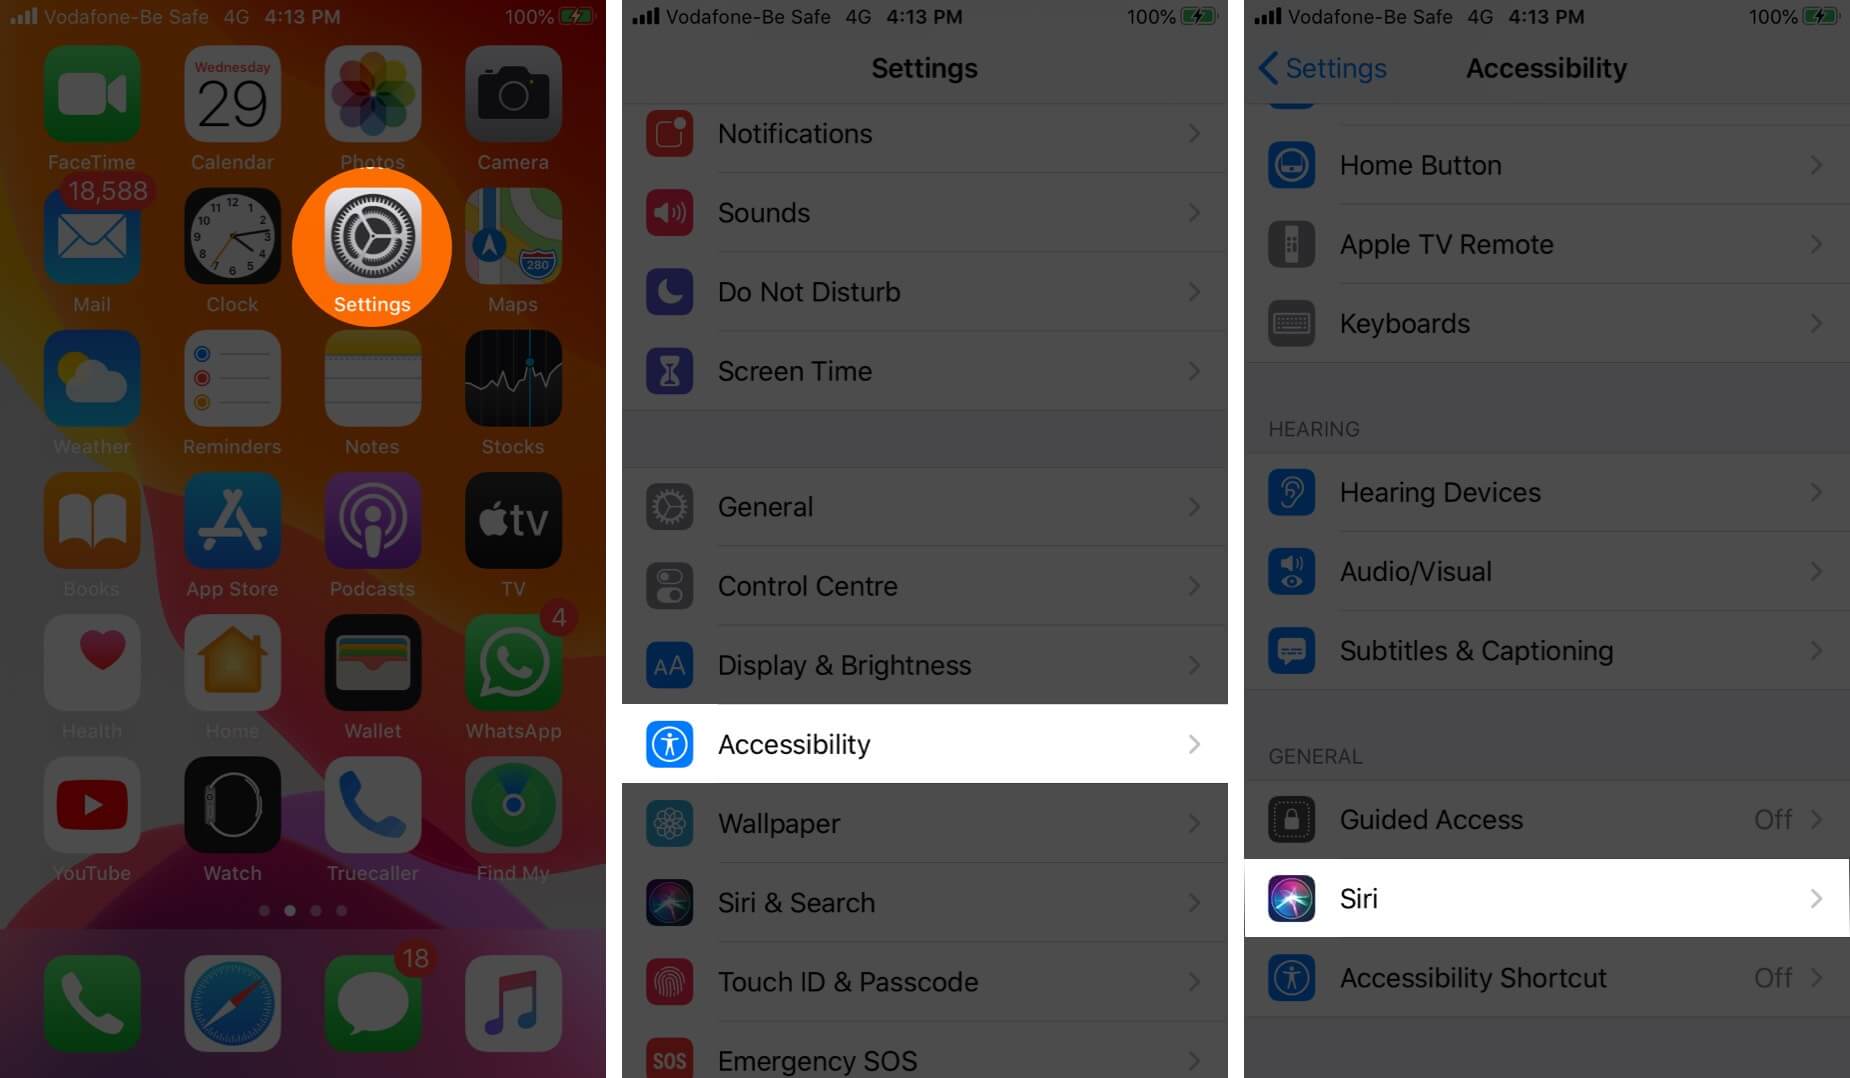 Open Settings Tap on Accessibility and Tap on Siri